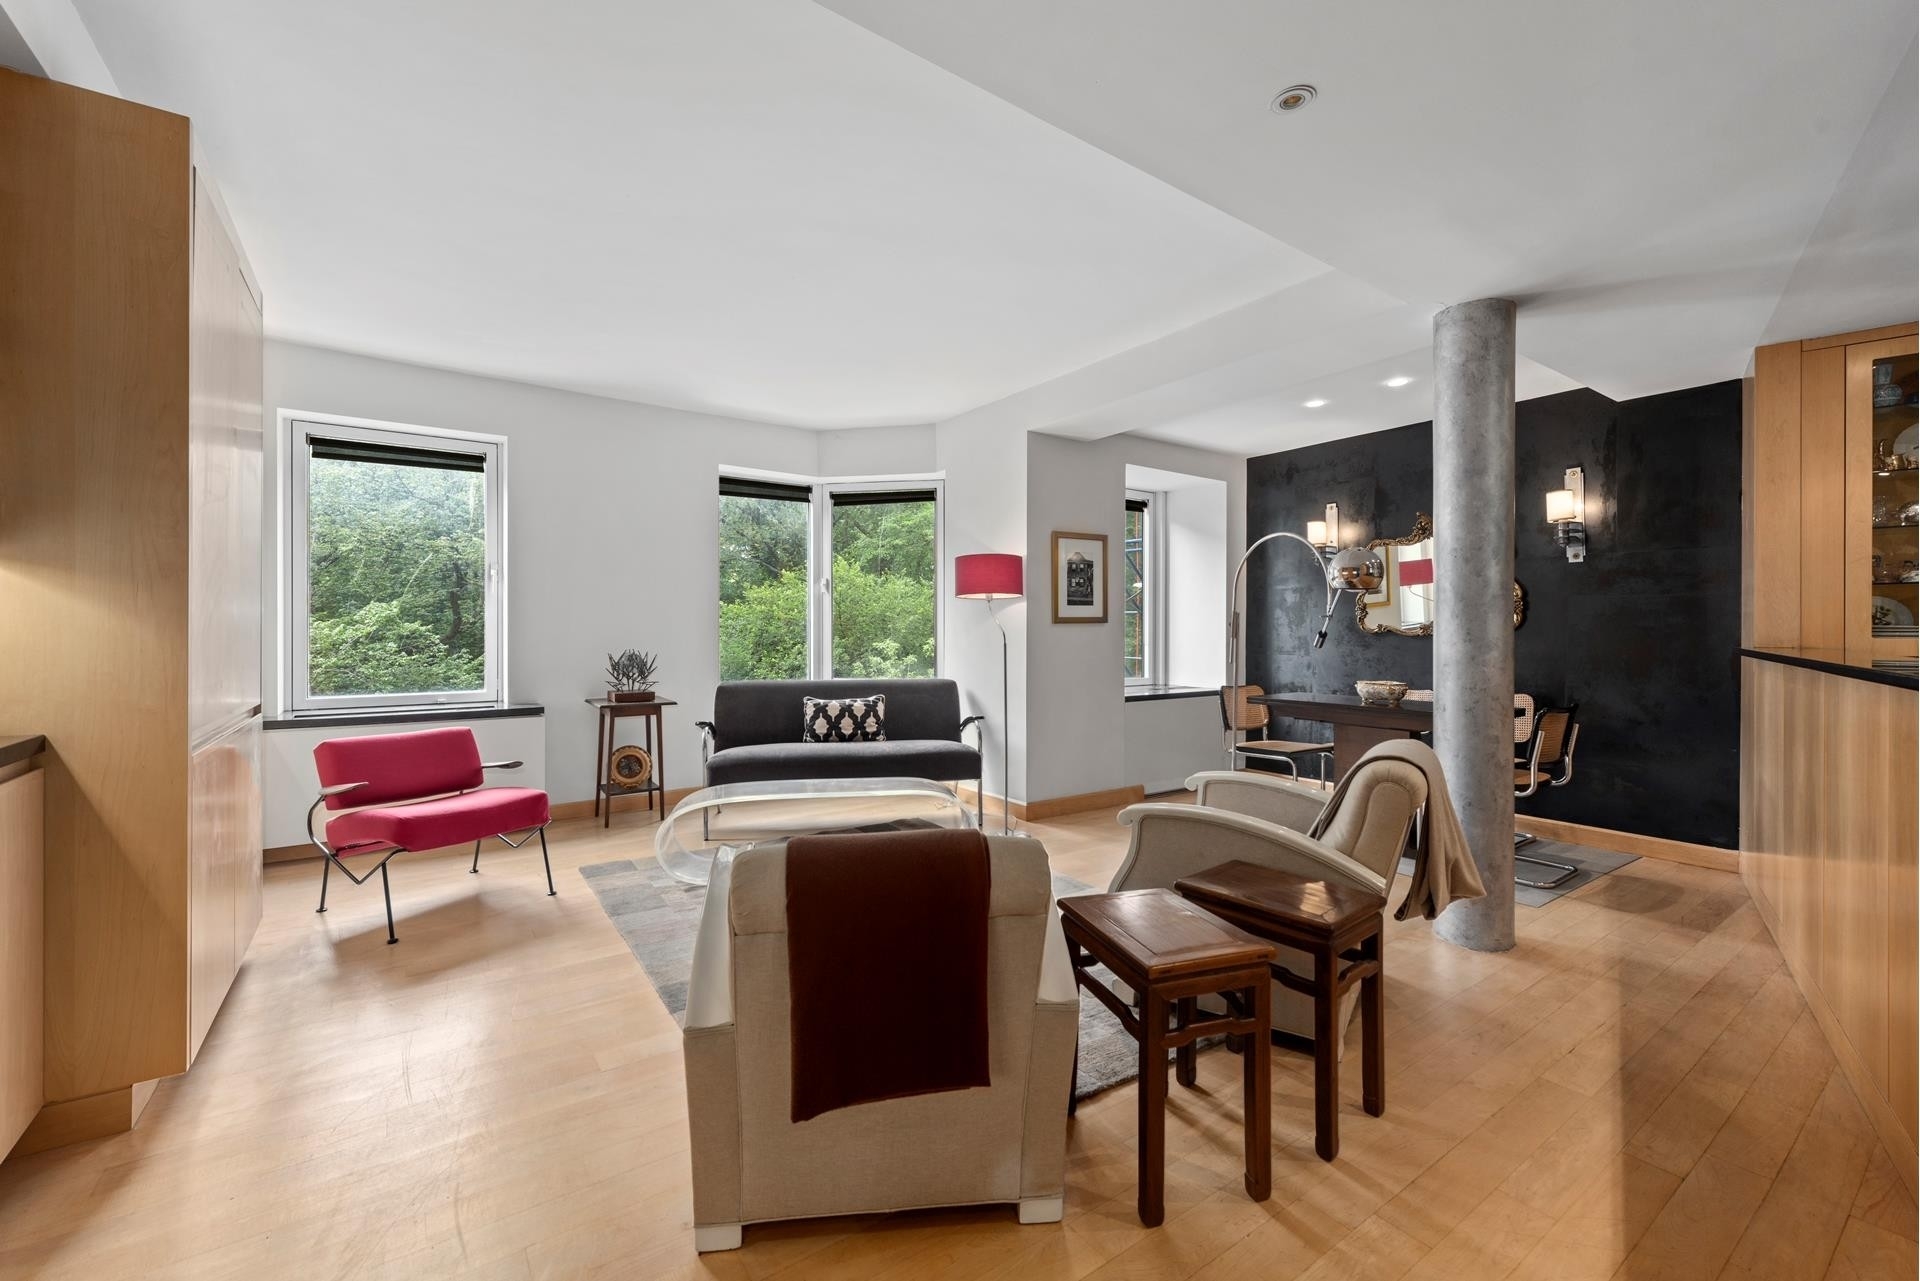 Co-op Properties for Sale at 870 FIFTH AVE, 4C Lenox Hill, New York, NY 10065